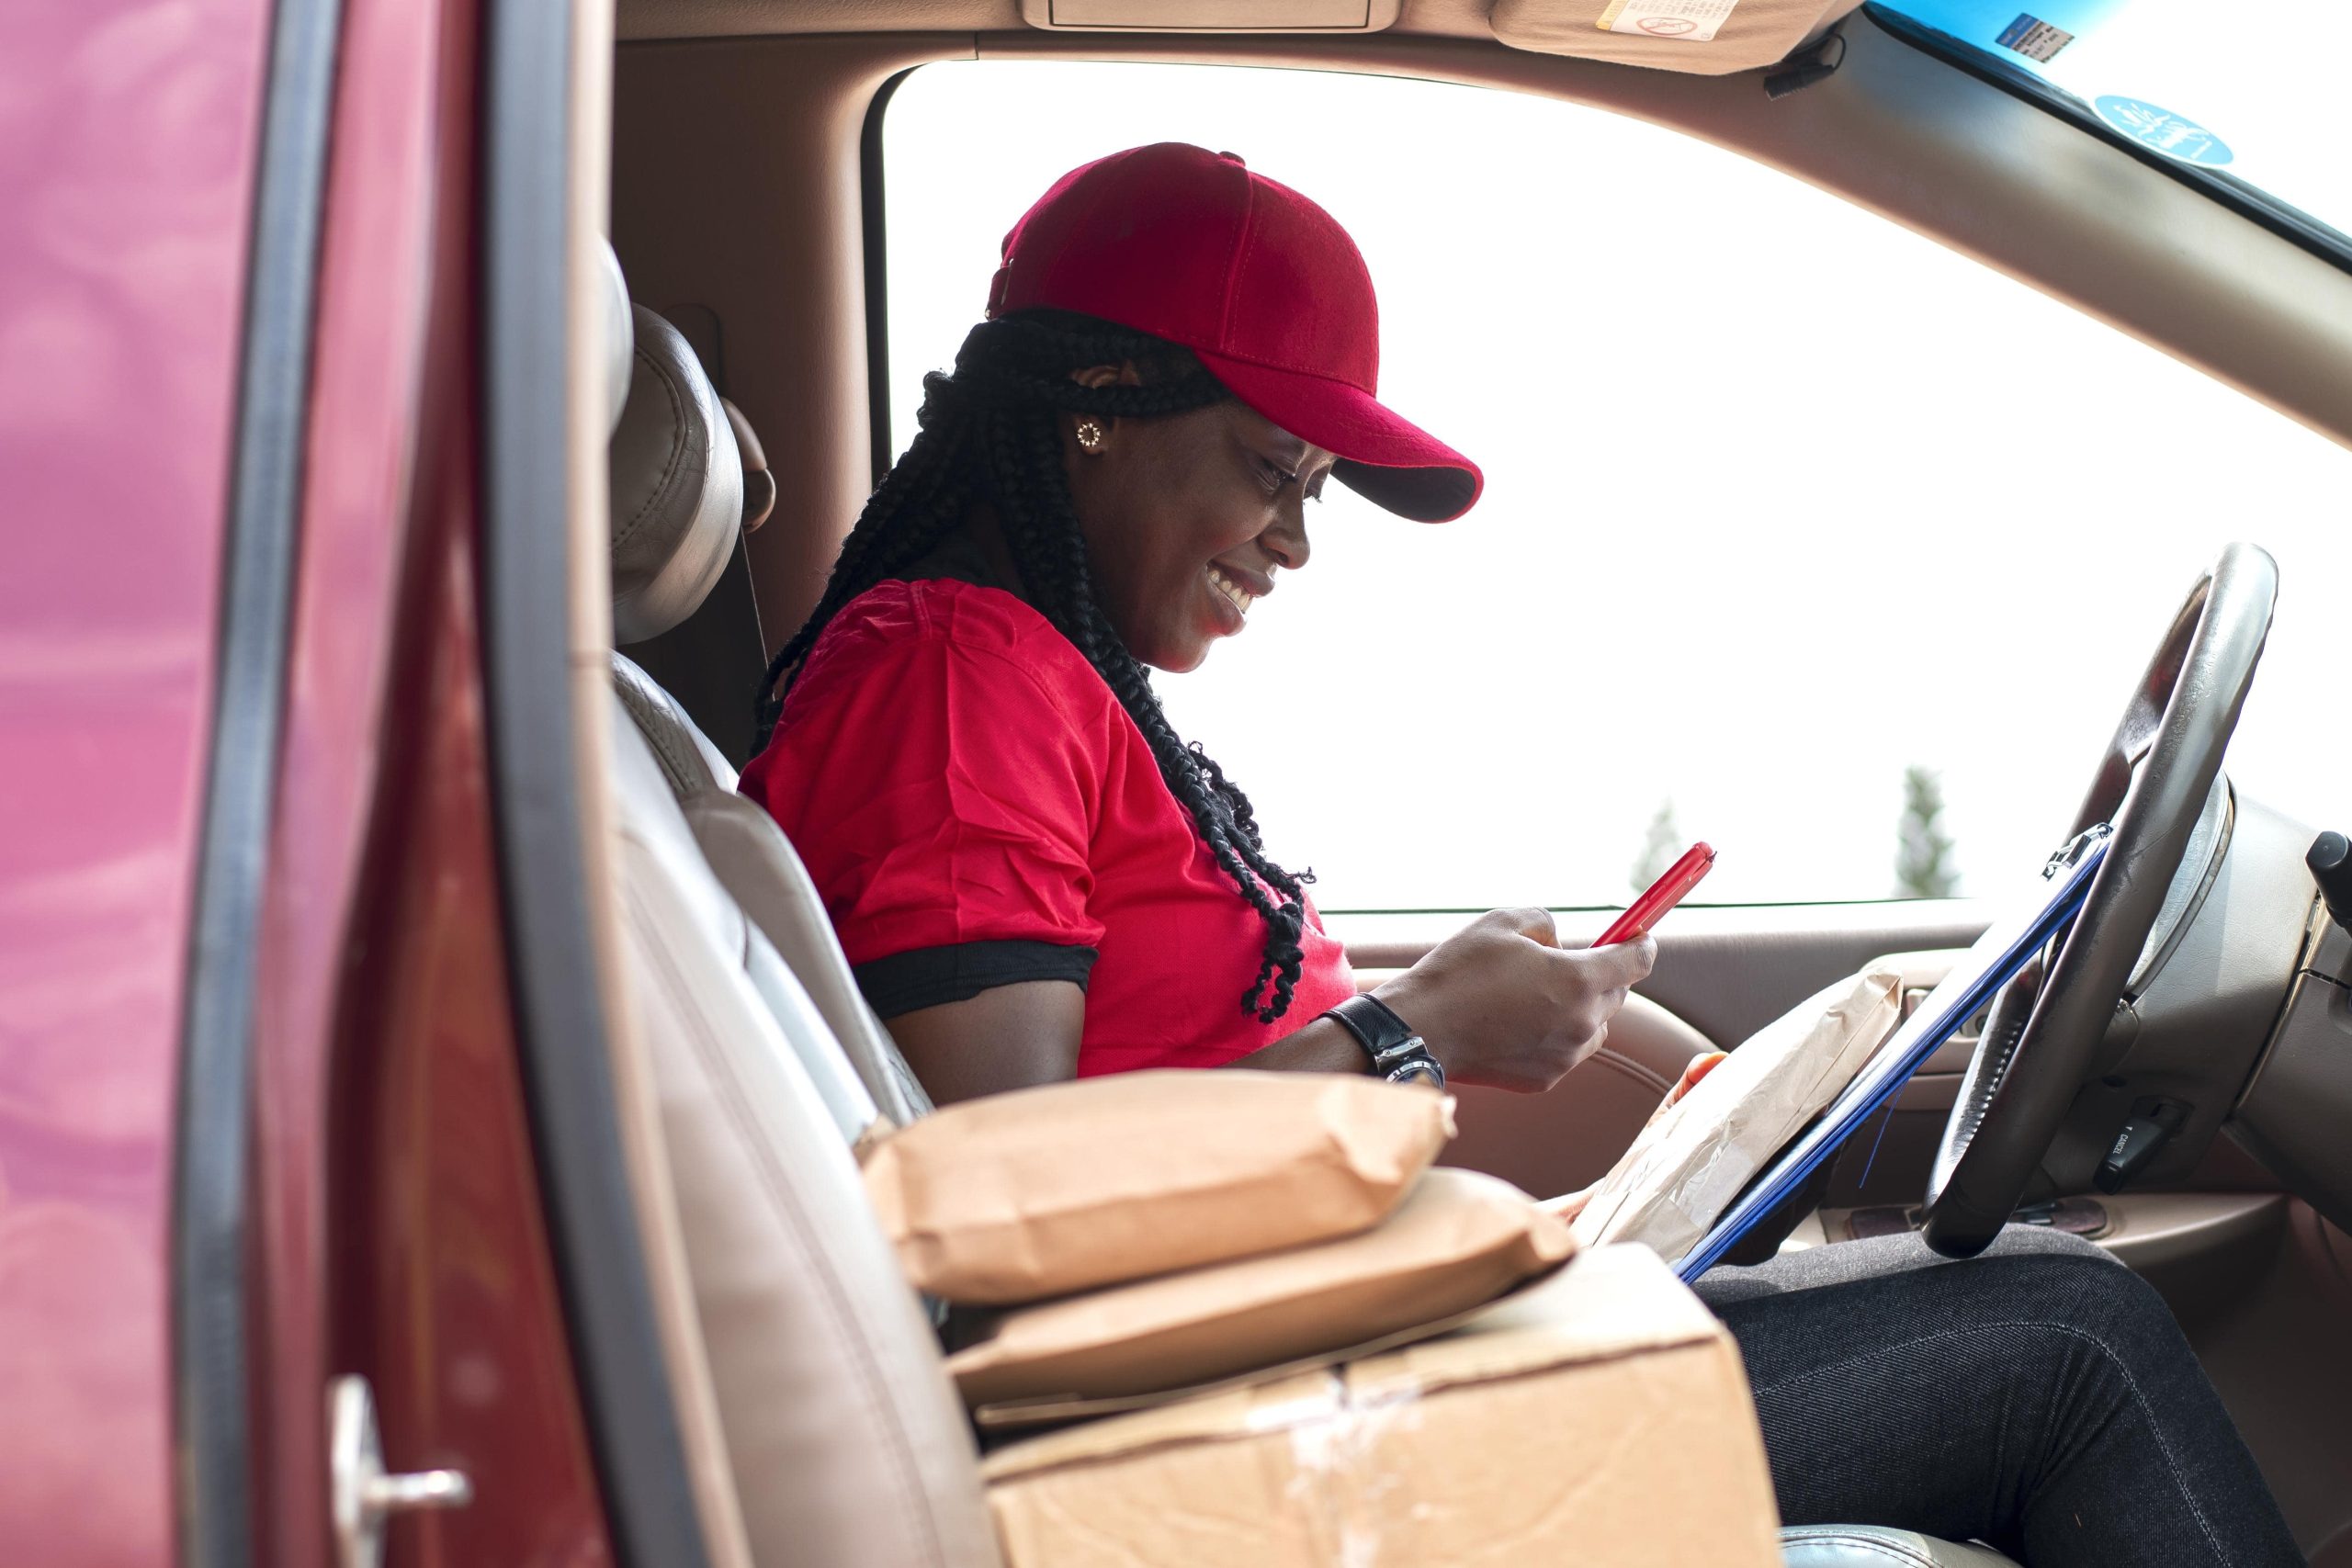 Woman uses the Roadie Driver App for deliveries while MileageWise records every mile in the background